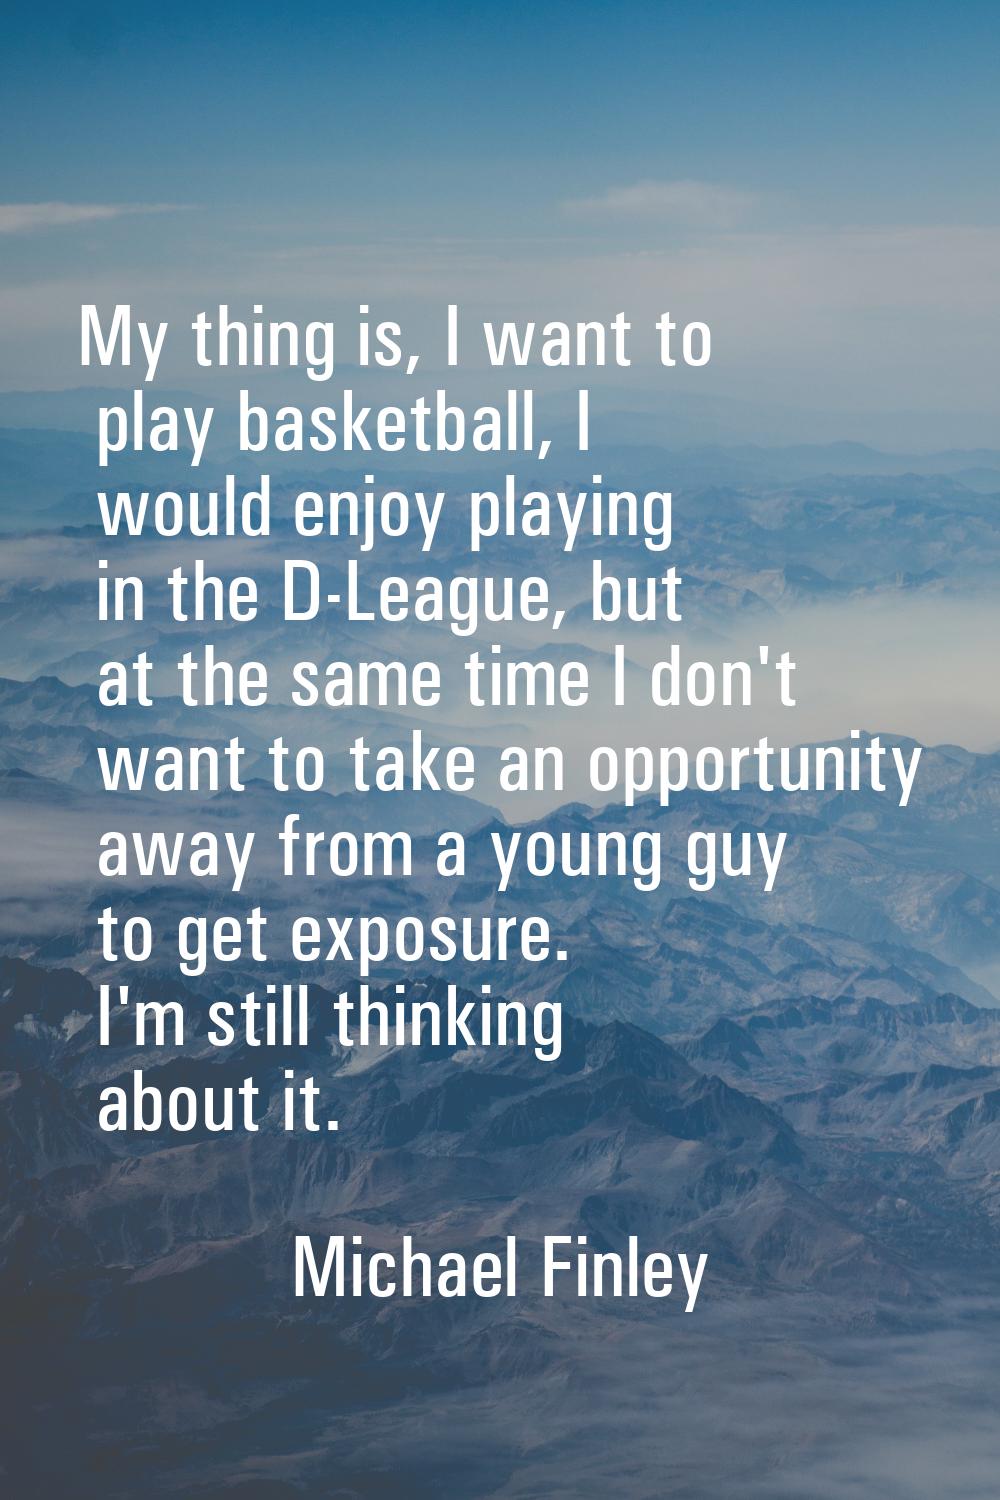 My thing is, I want to play basketball, I would enjoy playing in the D-League, but at the same time